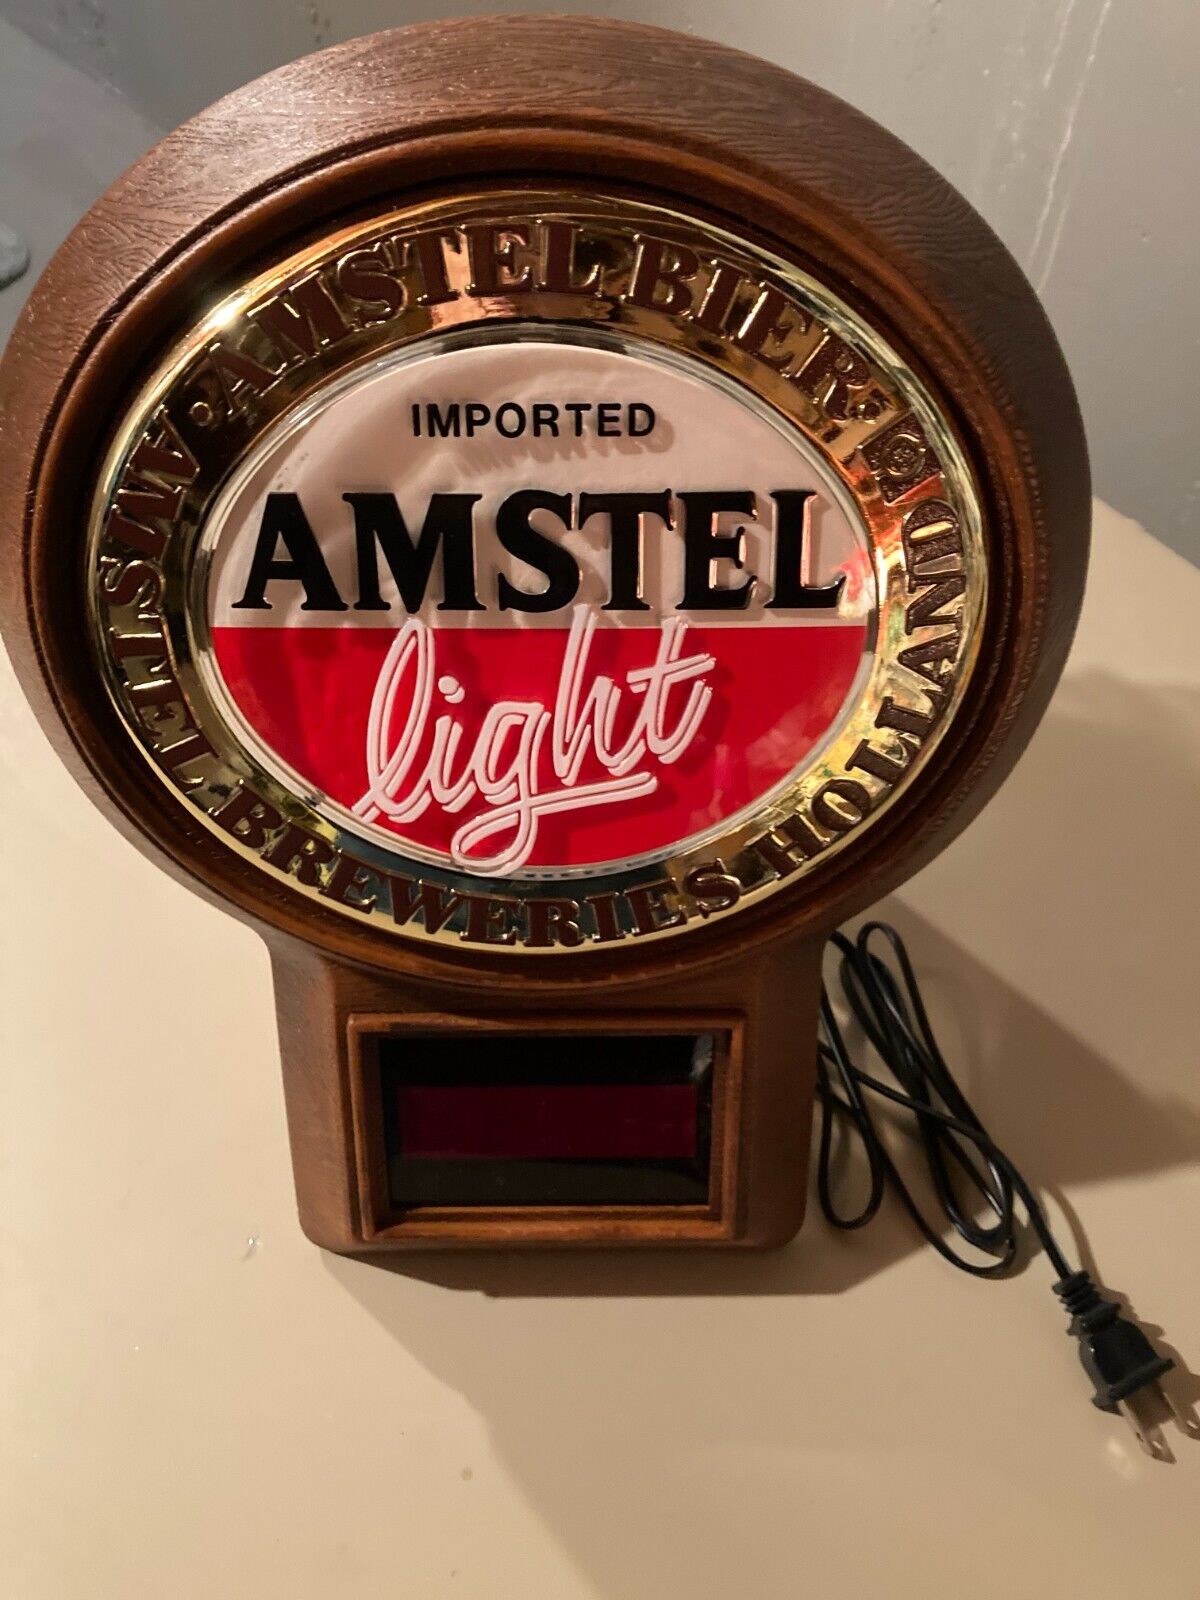 Amstel Light electric clock.  Excellent condition, new in early 1990's Без бренда